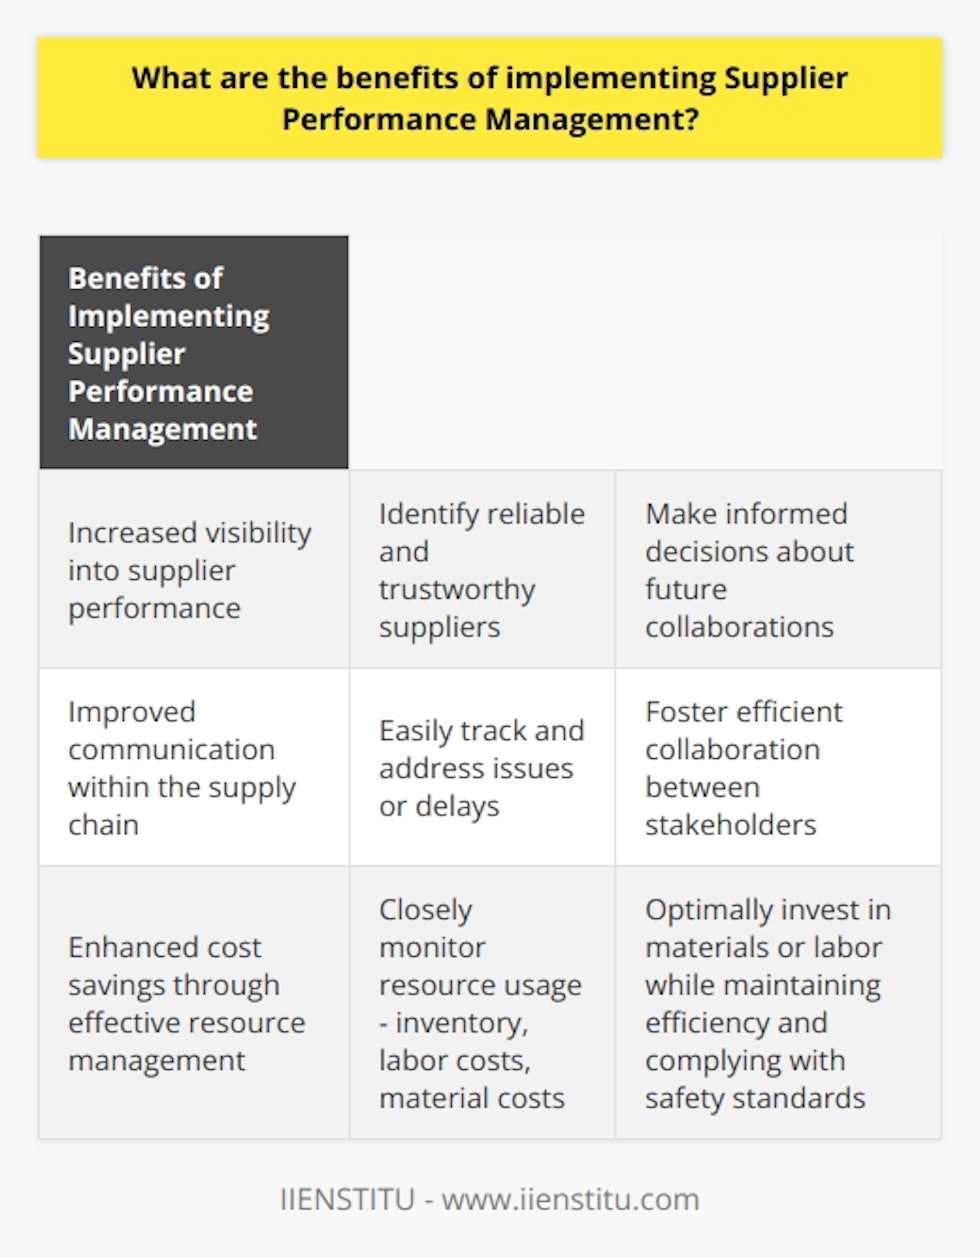 Implementing Supplier Performance Management (SPM) offers several significant benefits to organizations. Firstly, it provides increased visibility into supplier performance, allowing organizations to identify which suppliers are meeting their expectations and those that are not. This enables organizations to work with reliable and trustworthy suppliers who consistently deliver high-quality products or services at competitive prices. Additionally, it empowers organizations to have greater control over their supply chain by making informed decisions about future collaborations with suppliers.Another advantage of implementing SPM is improved communication within the supply chain. By utilizing SPM, organizations can easily track and address issues or delays in deliveries or services. This transparency fosters efficient collaboration between stakeholders, ensuring that problems can be resolved before they become costly or harm the relationship between the organization and its suppliers.Moreover, SPM contributes to enhanced cost savings for organizations through effective resource management. By utilizing advanced analytics capabilities offered by SPM systems, organizations can closely monitor resource usage, such as inventory, labor costs, and material costs. This enables organizations to understand the optimal investment required for materials or labor to produce a certain quantity of products at the desired quality level while maintaining efficiency and complying with safety standards set by regulatory bodies like OSHA.To summarize, implementing Supplier Performance Management offers numerous advantages for organizations. It provides increased visibility into supplier performance, improves communication within the supply chain, and promotes cost savings through efficient resource management.